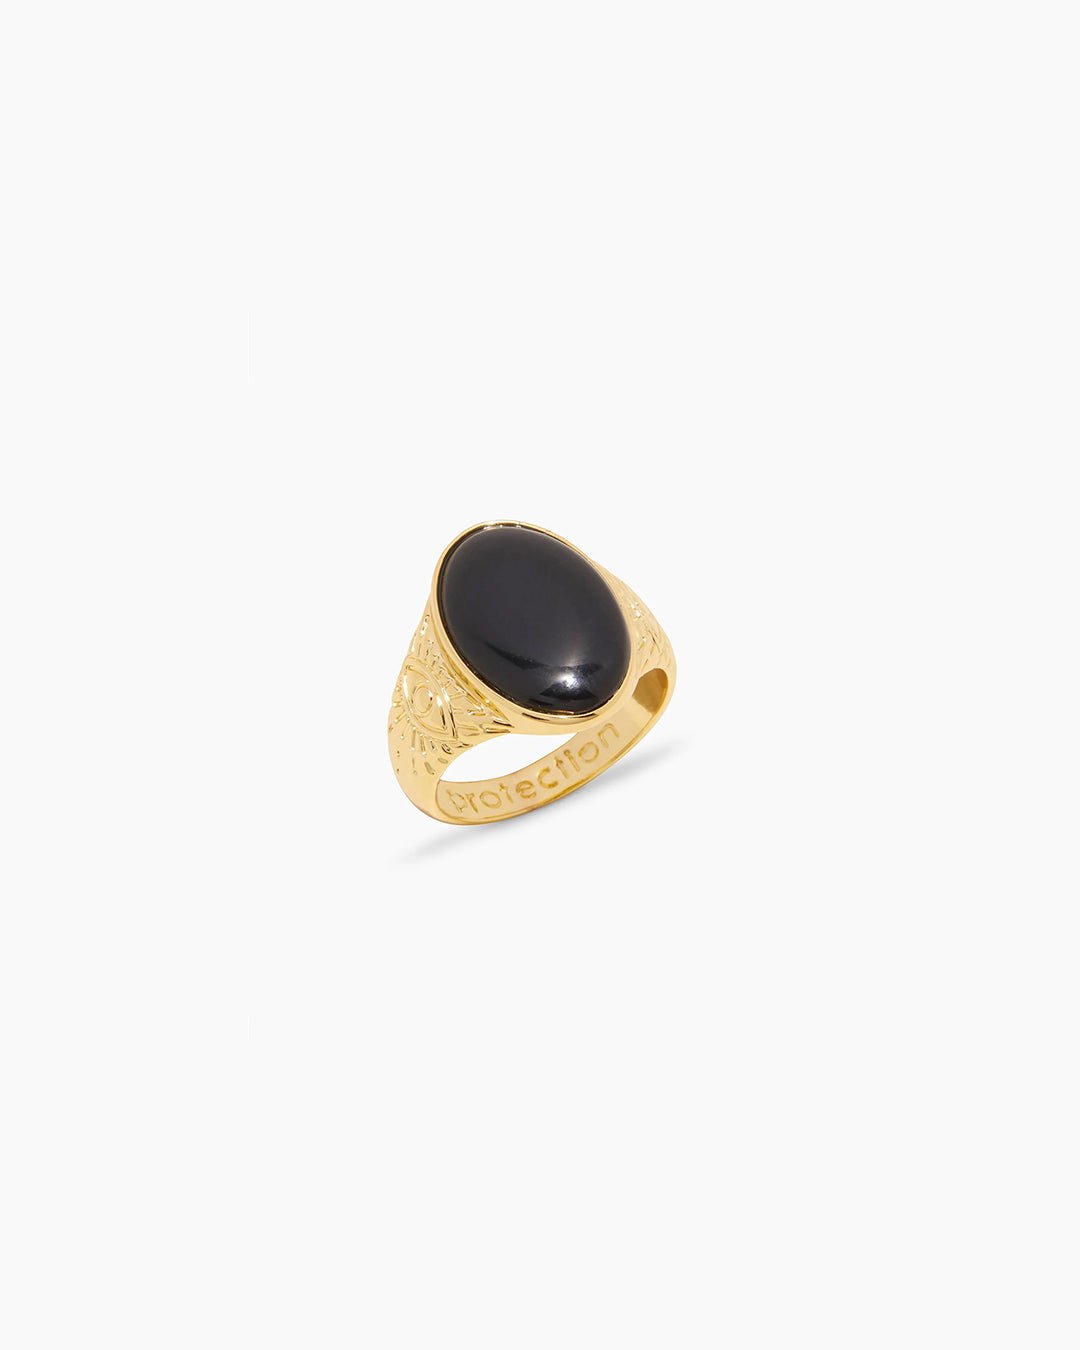 Power Gemstone Mantra Ring for Protection || option::Gold Plated, Black Onyx